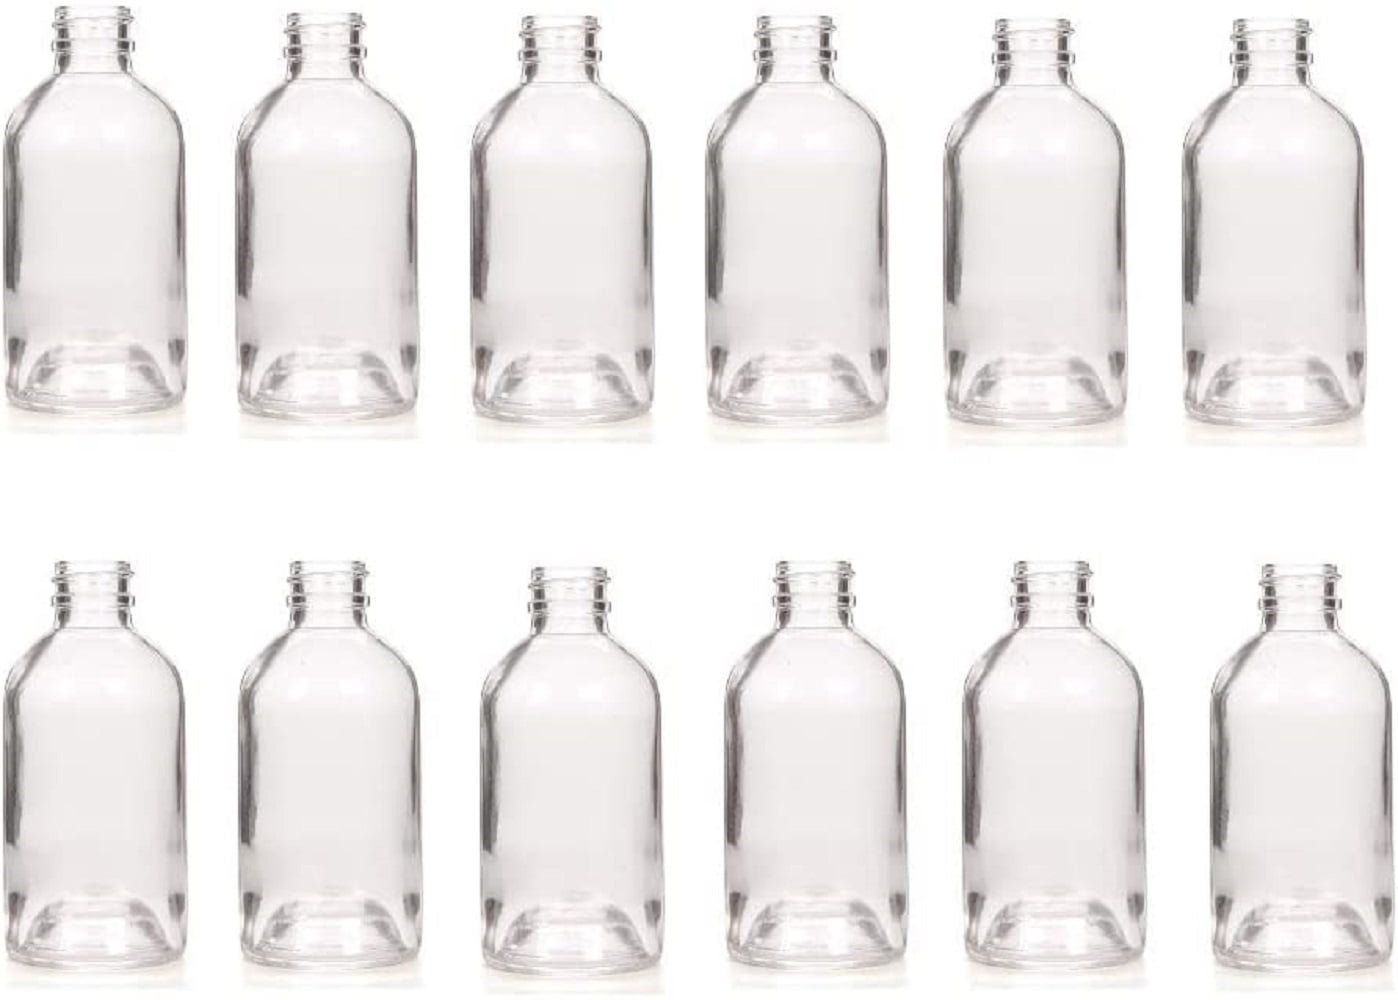 Hosley Set of 12 Clear Diffuser Boston Round Style Glass Diffuser ...